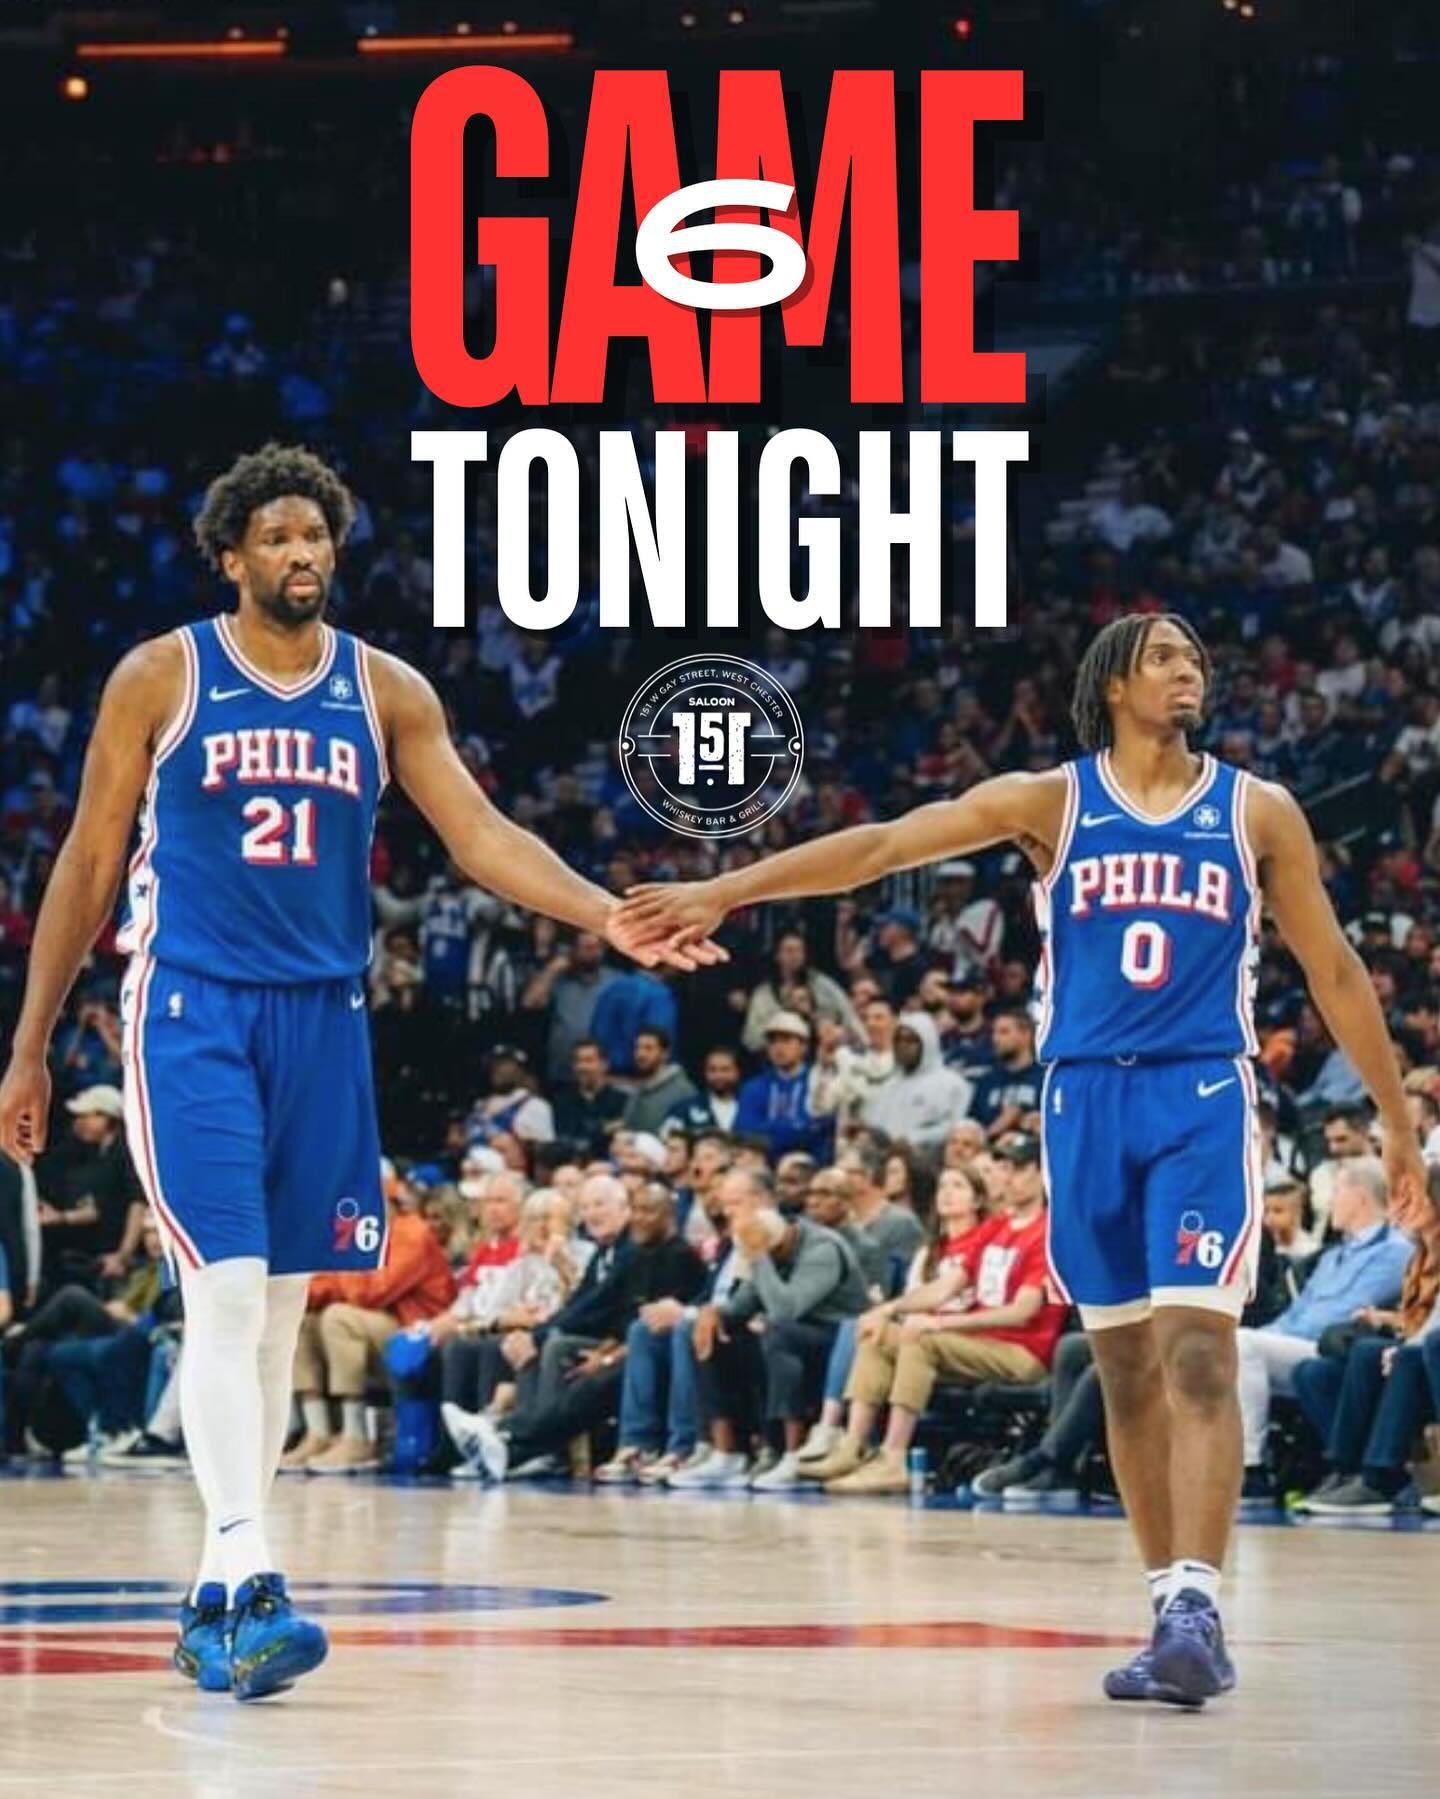 One, two, three, four, five, sixers&hellip;
Ten, nine, eight, 76ers! 🏀 Game 6 TONIGHT! Come watch with us! It&rsquo;s Wing Day! 🍗👑 10 Wings for $8. Tossed in Your Choice of Any Sauce. Served with Blue Cheese or Ranch and Celery. 
*All food special